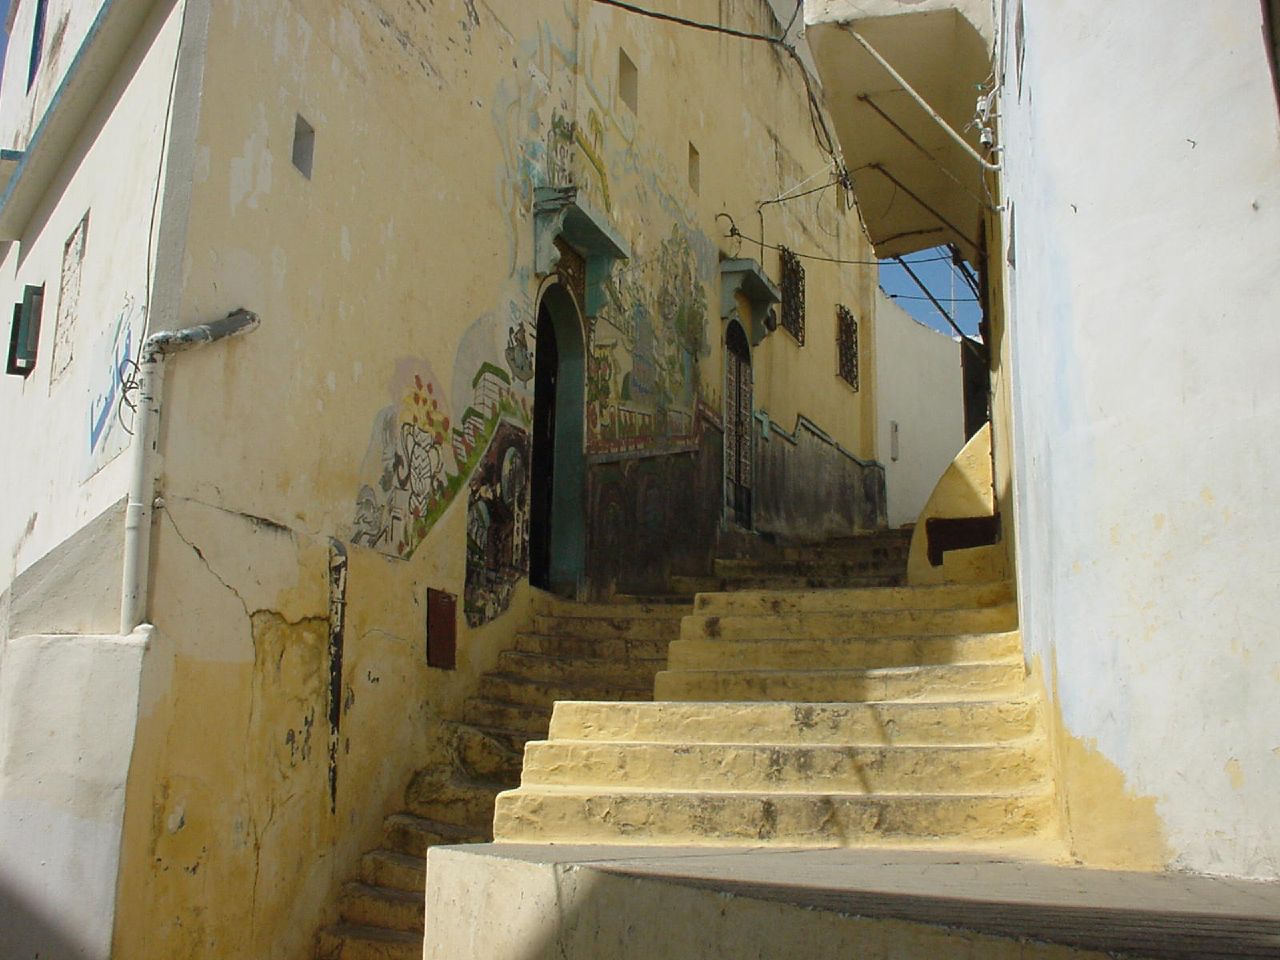 a street has stairs and graffiti painted on the side of the building